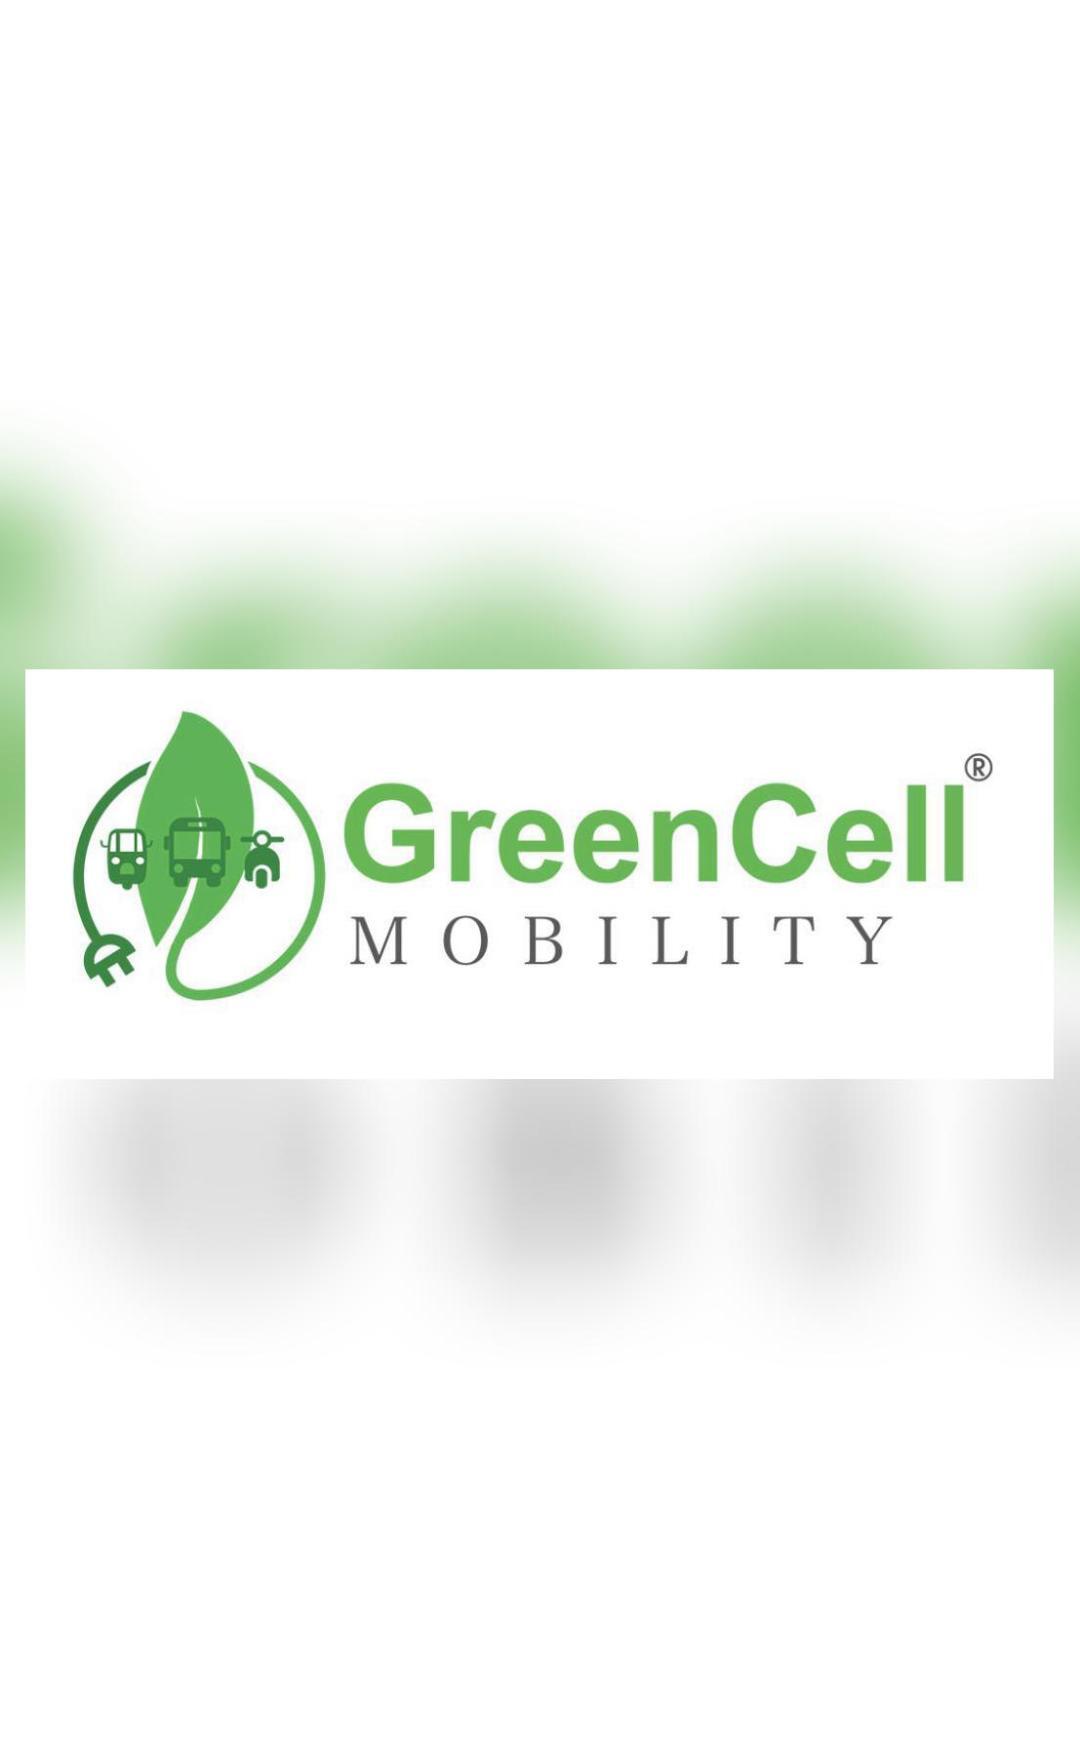 GreenCell receives $55 million debt funding to develop 255 e-buses